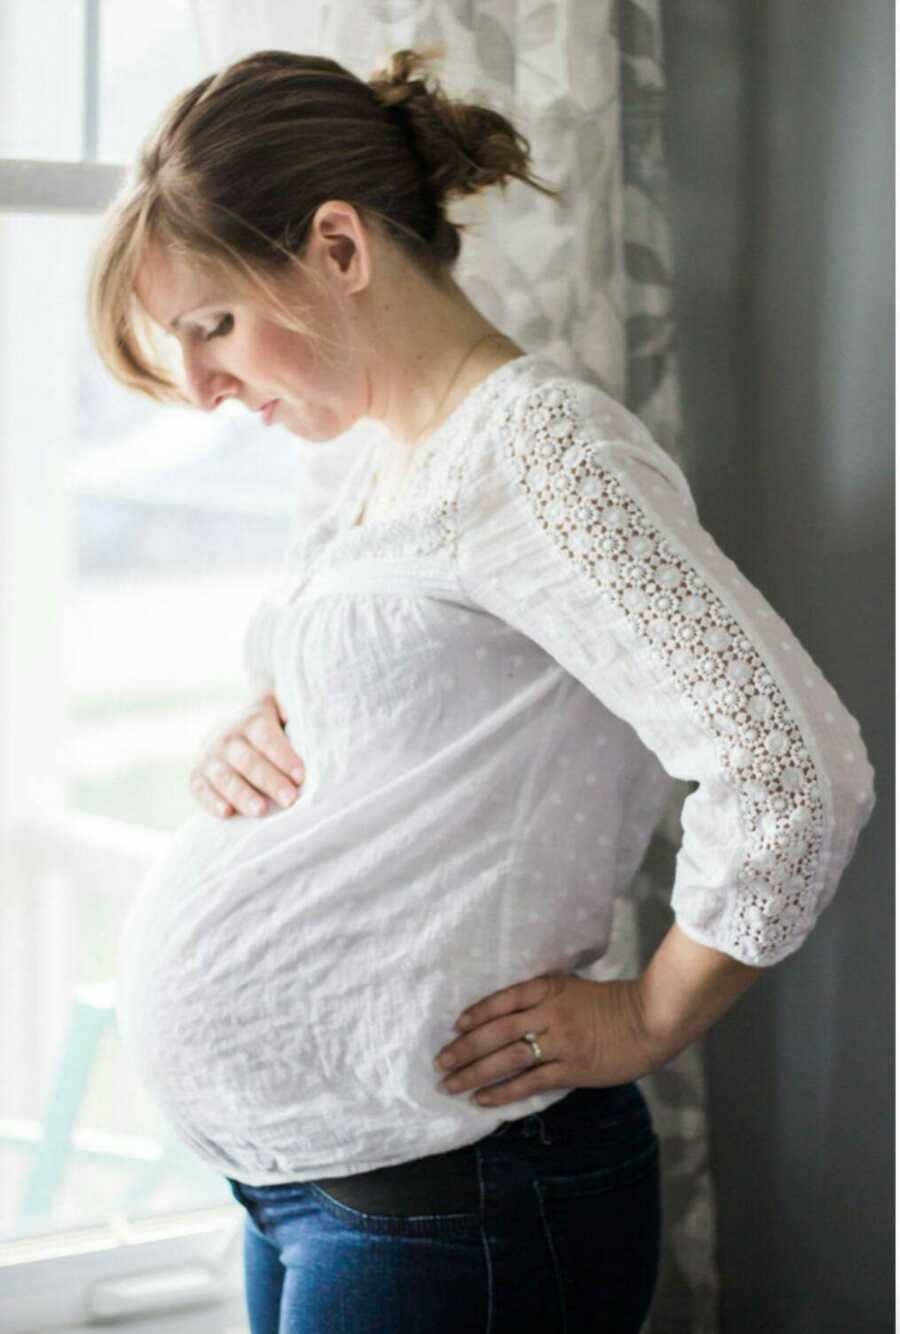 pregnant woman holds and looks down at belly while standing in front of a window 